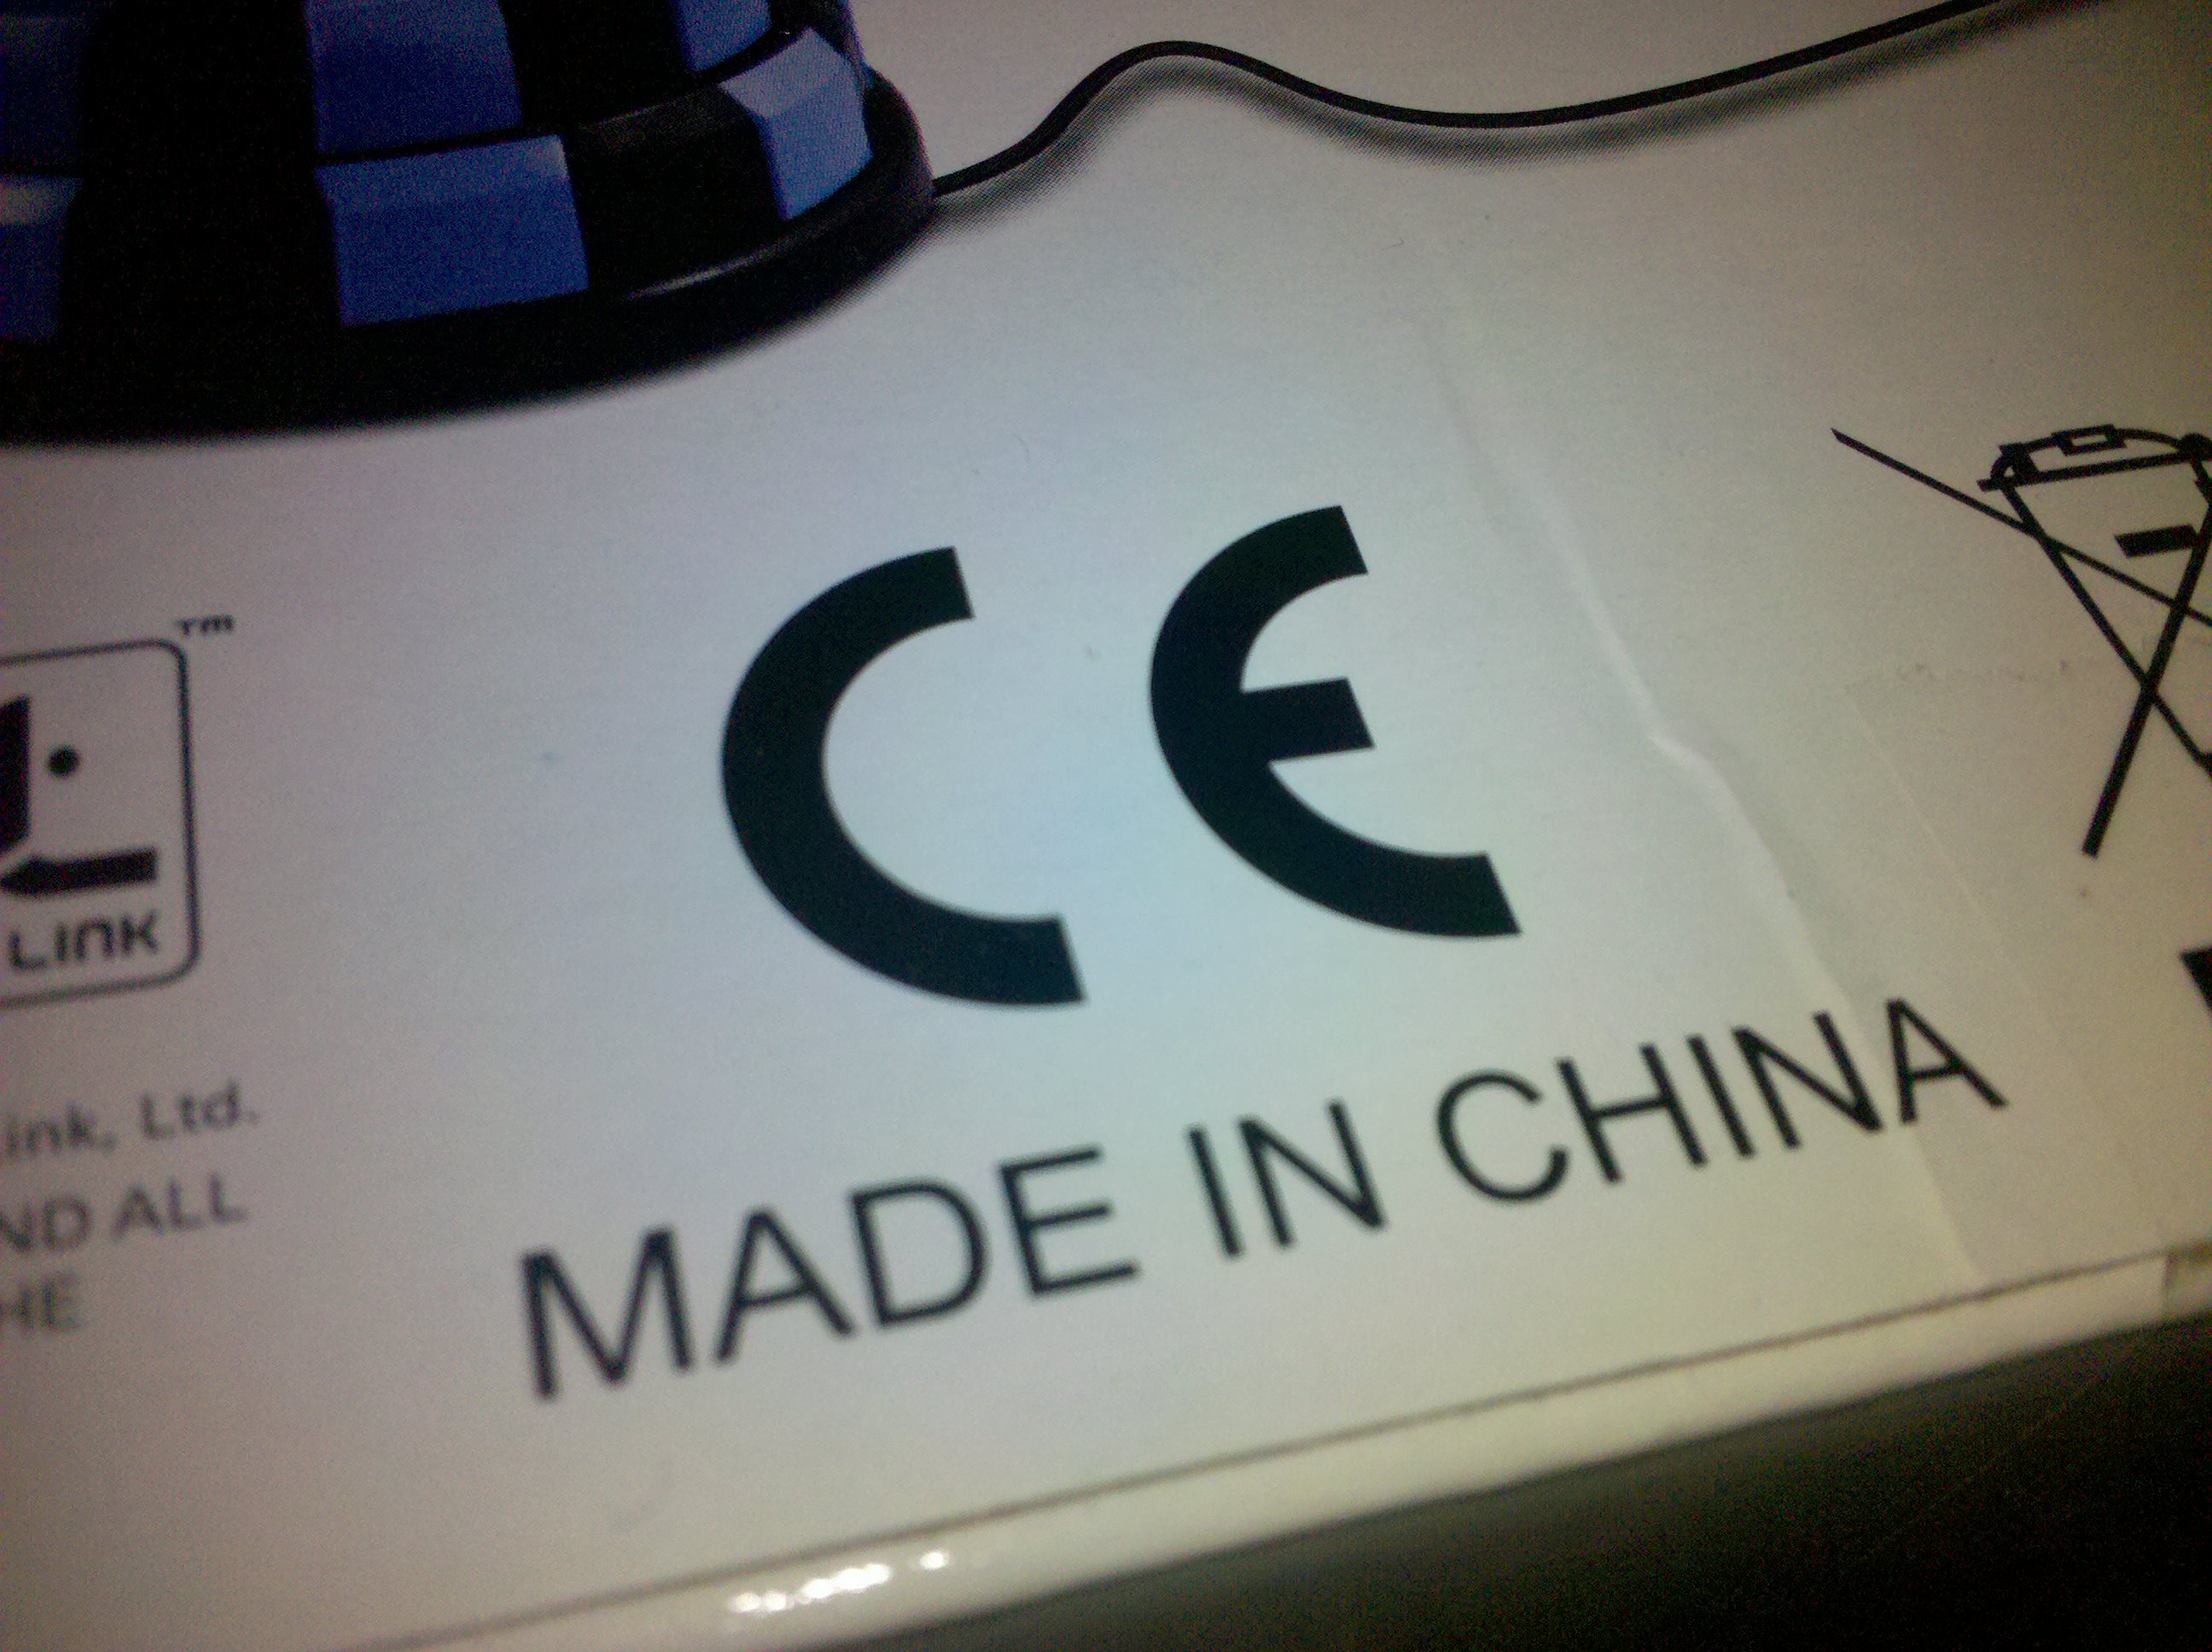 CE_Made_in_China.jpg